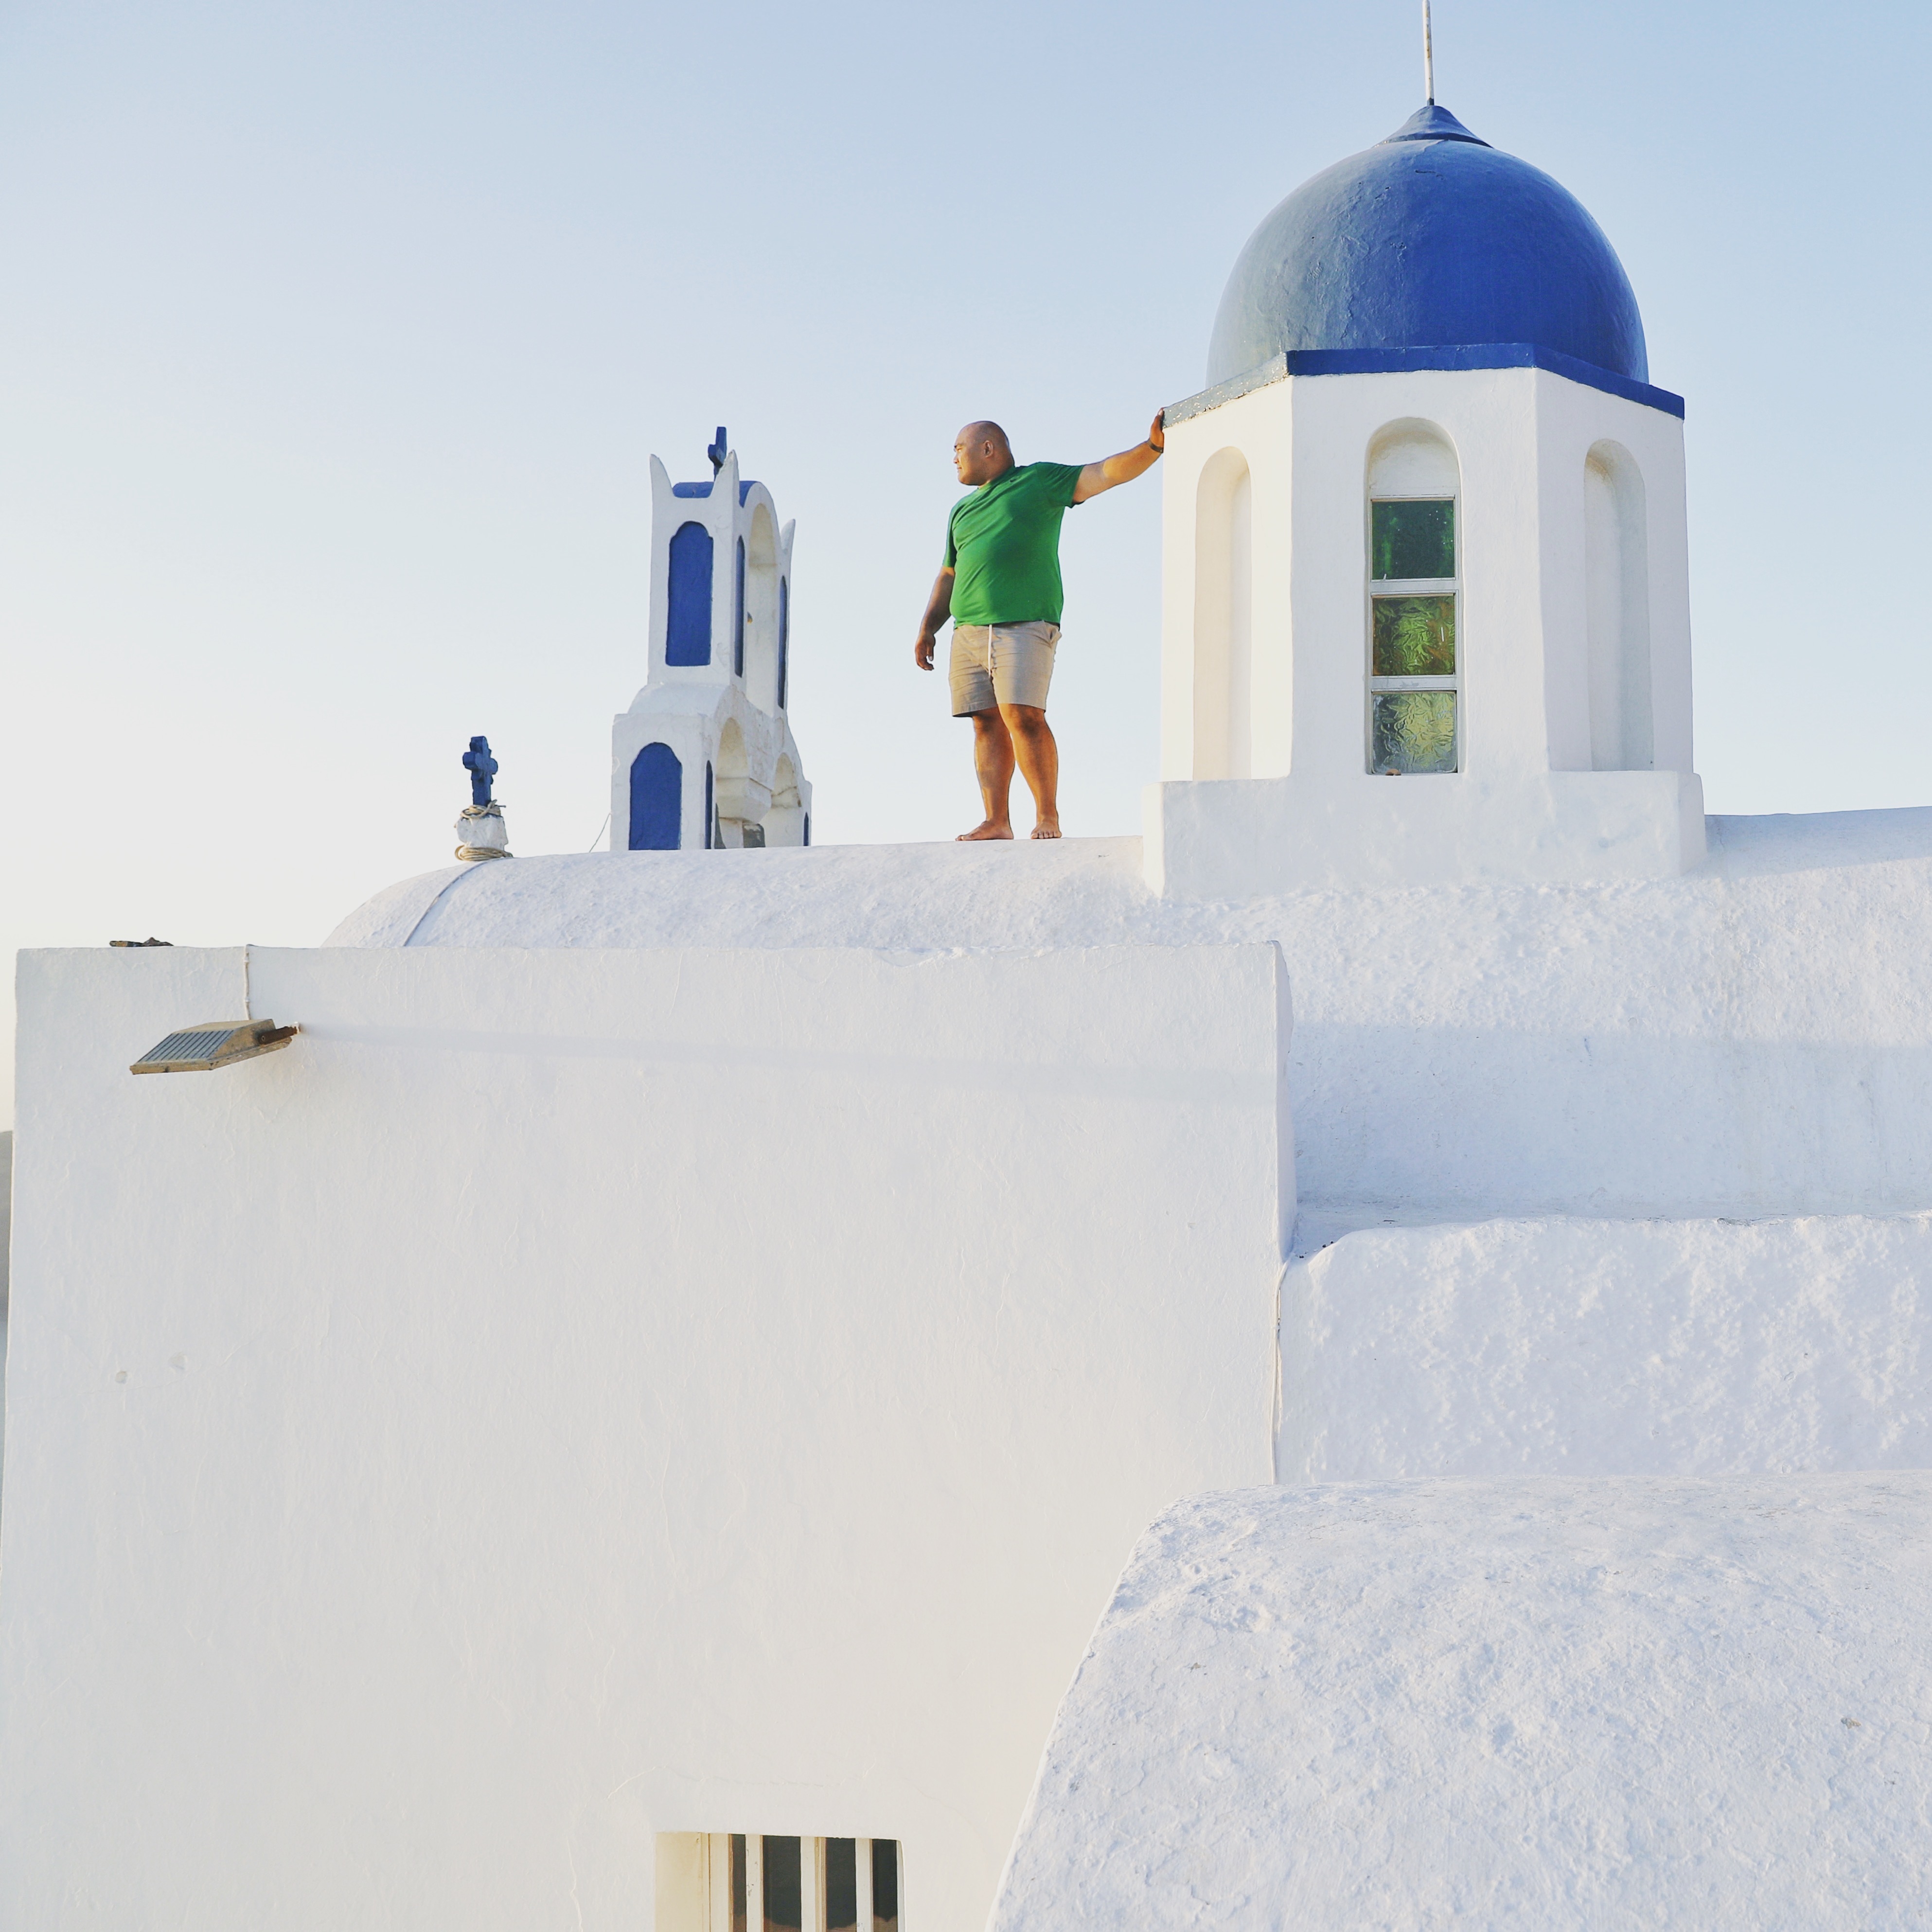 Greece with Insight Vacations